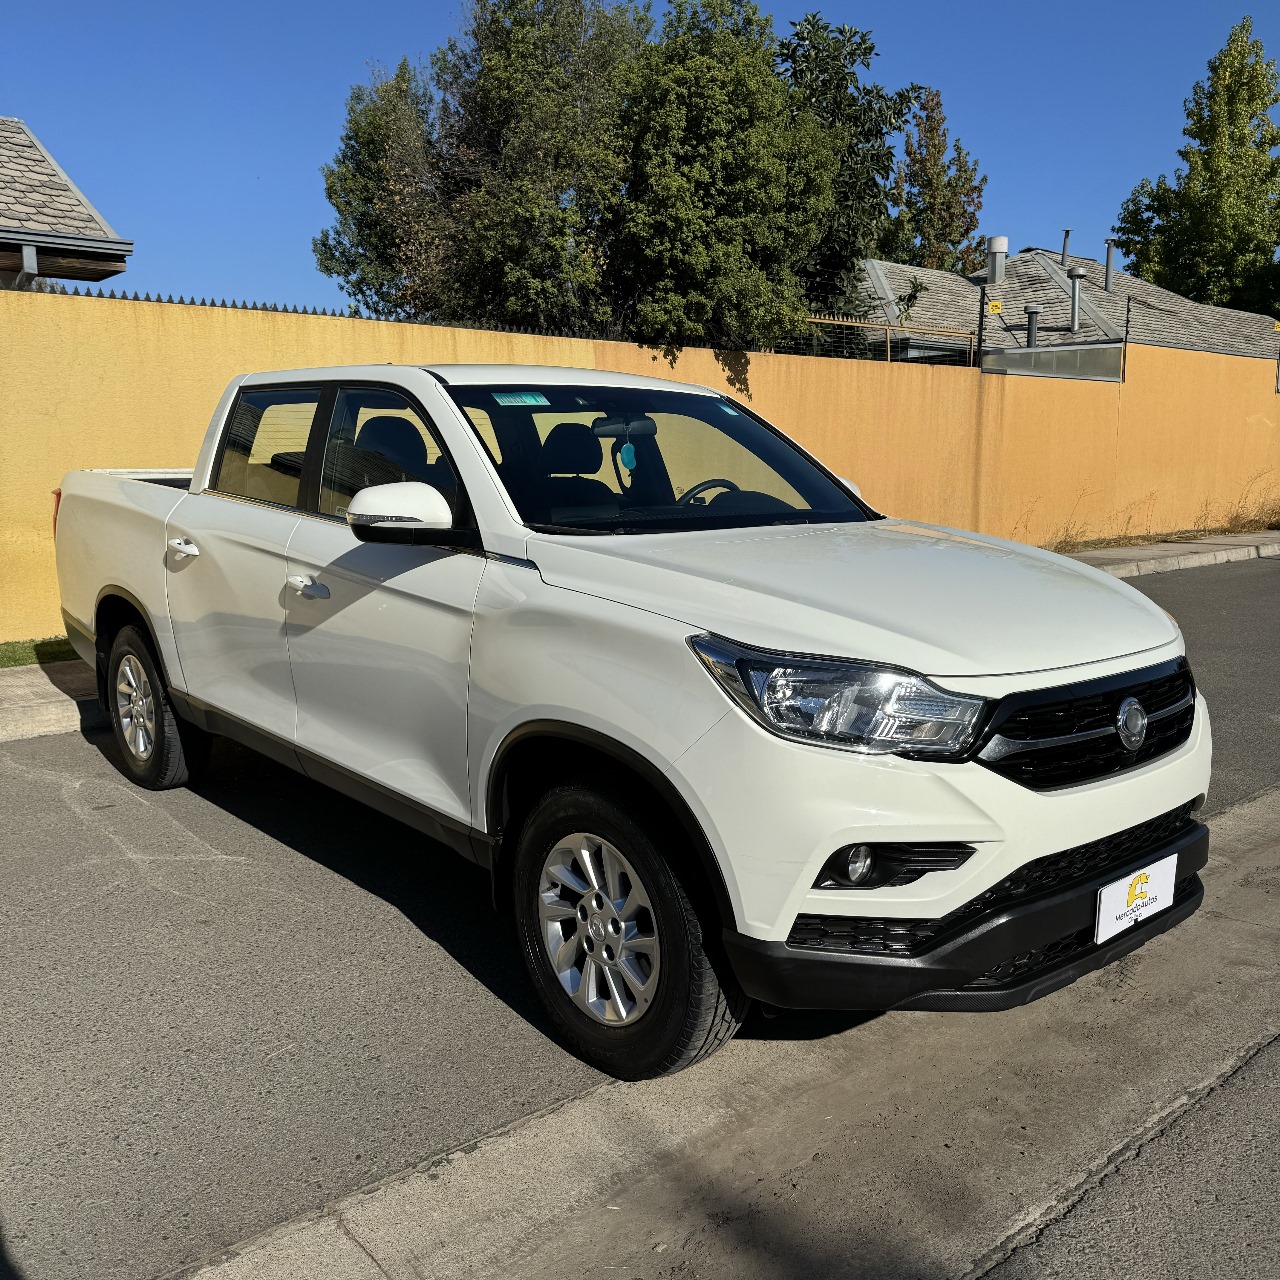 Ssangyong Grand Musso